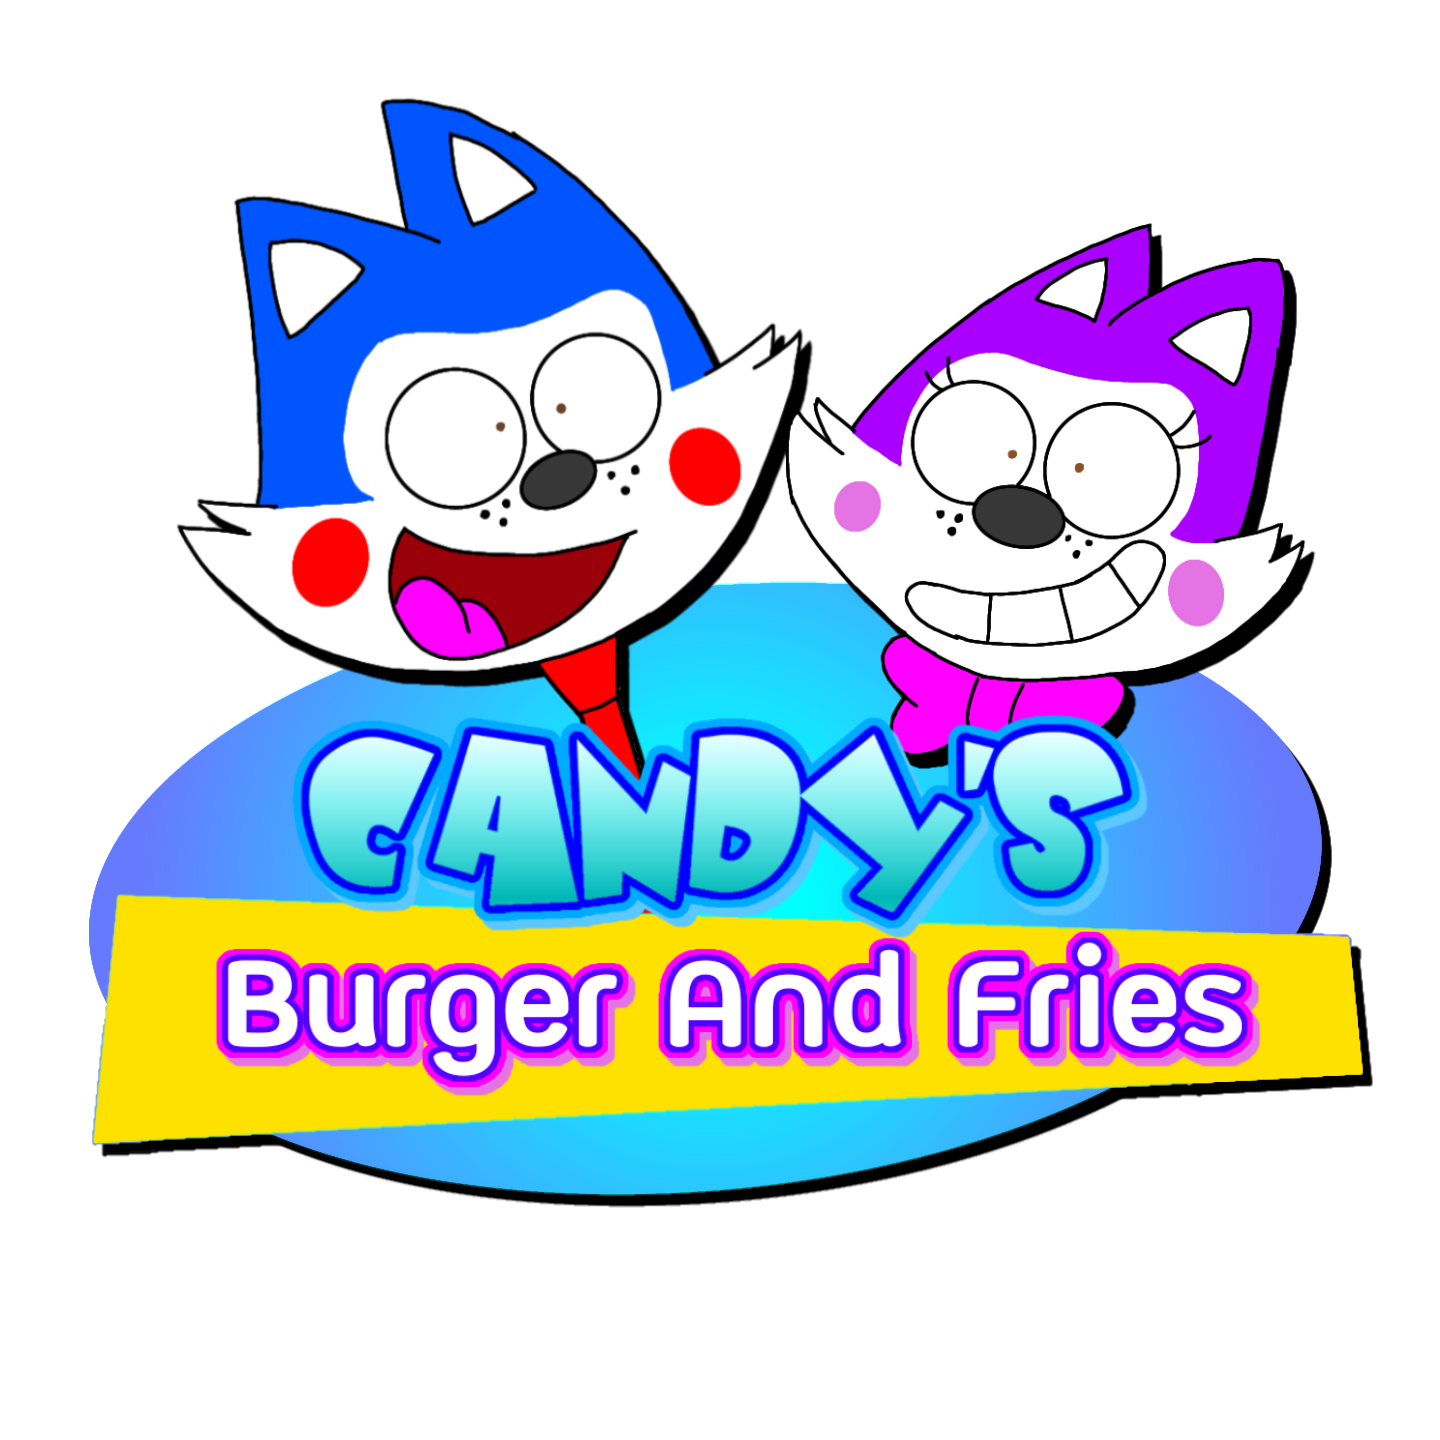 Candy's Burger and Fries — TO: [REDACTED]